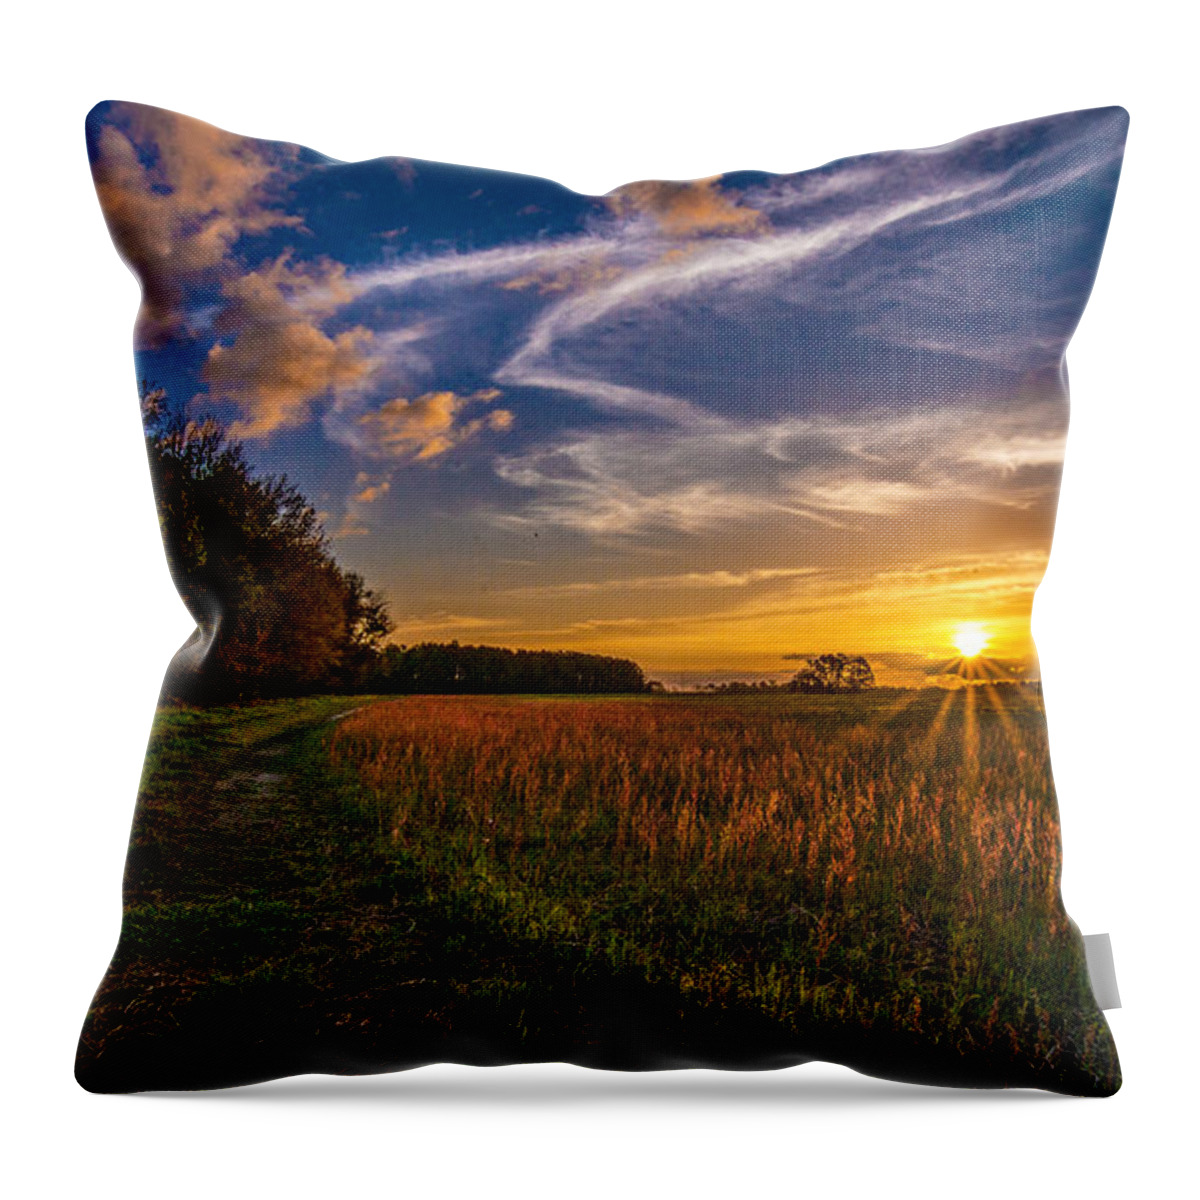 Dawn In The Lower 40 Prints Throw Pillow featuring the photograph Dawn In The Lower 40 by John Harding